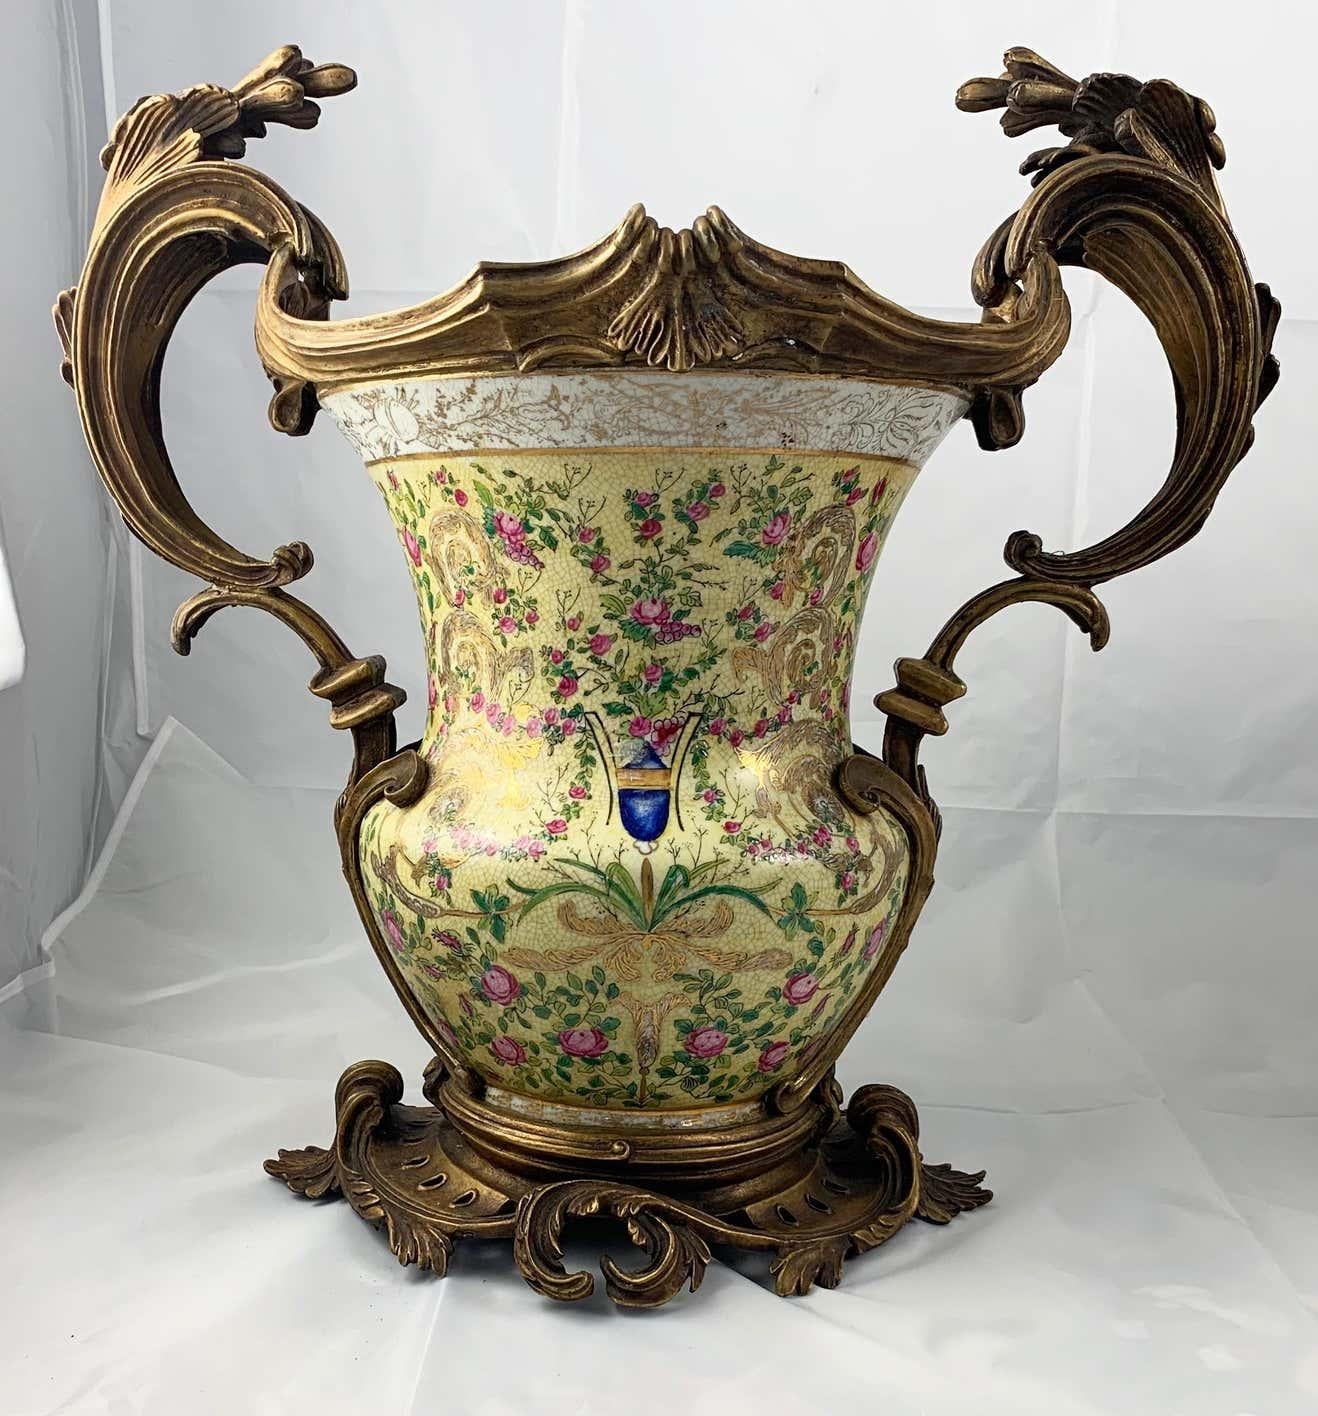 20th Century Pair of French Porcelain and Ormolu-Mounted Twin Handled Urns In Good Condition For Sale In Southall, GB